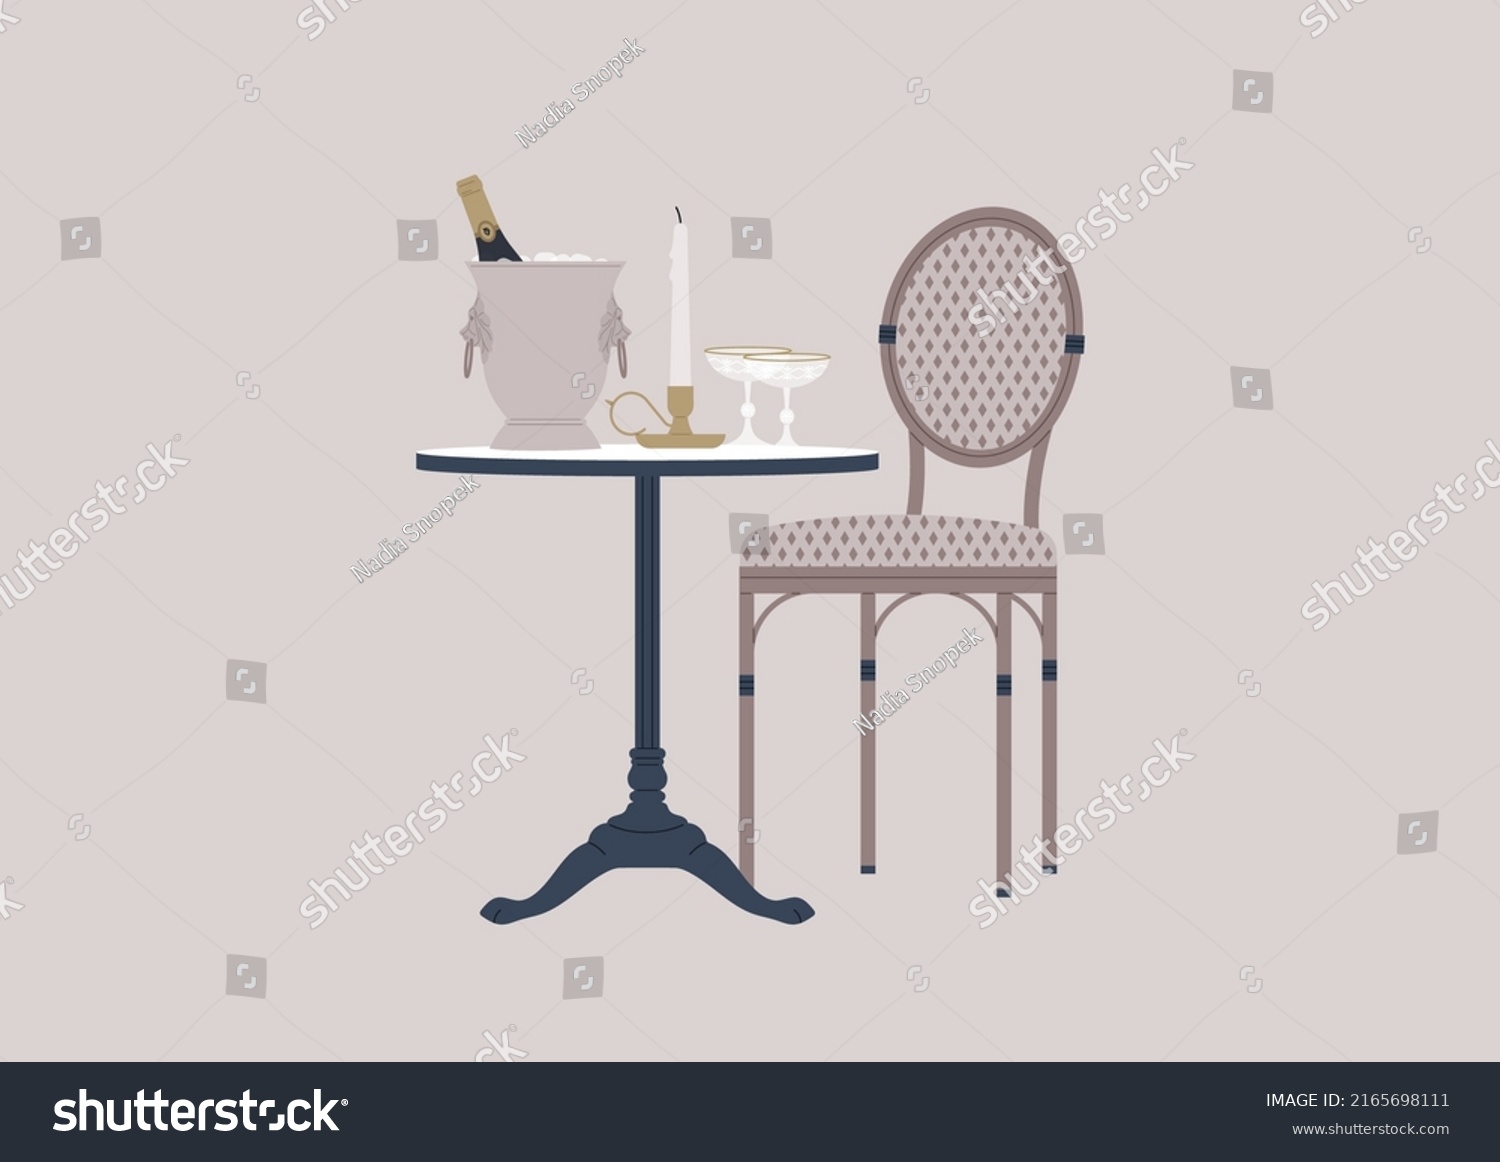 SVG of An outdoor french cafe table with a rattan chair, a champagne bucket, a candlestick, and sparkling wine glasses svg